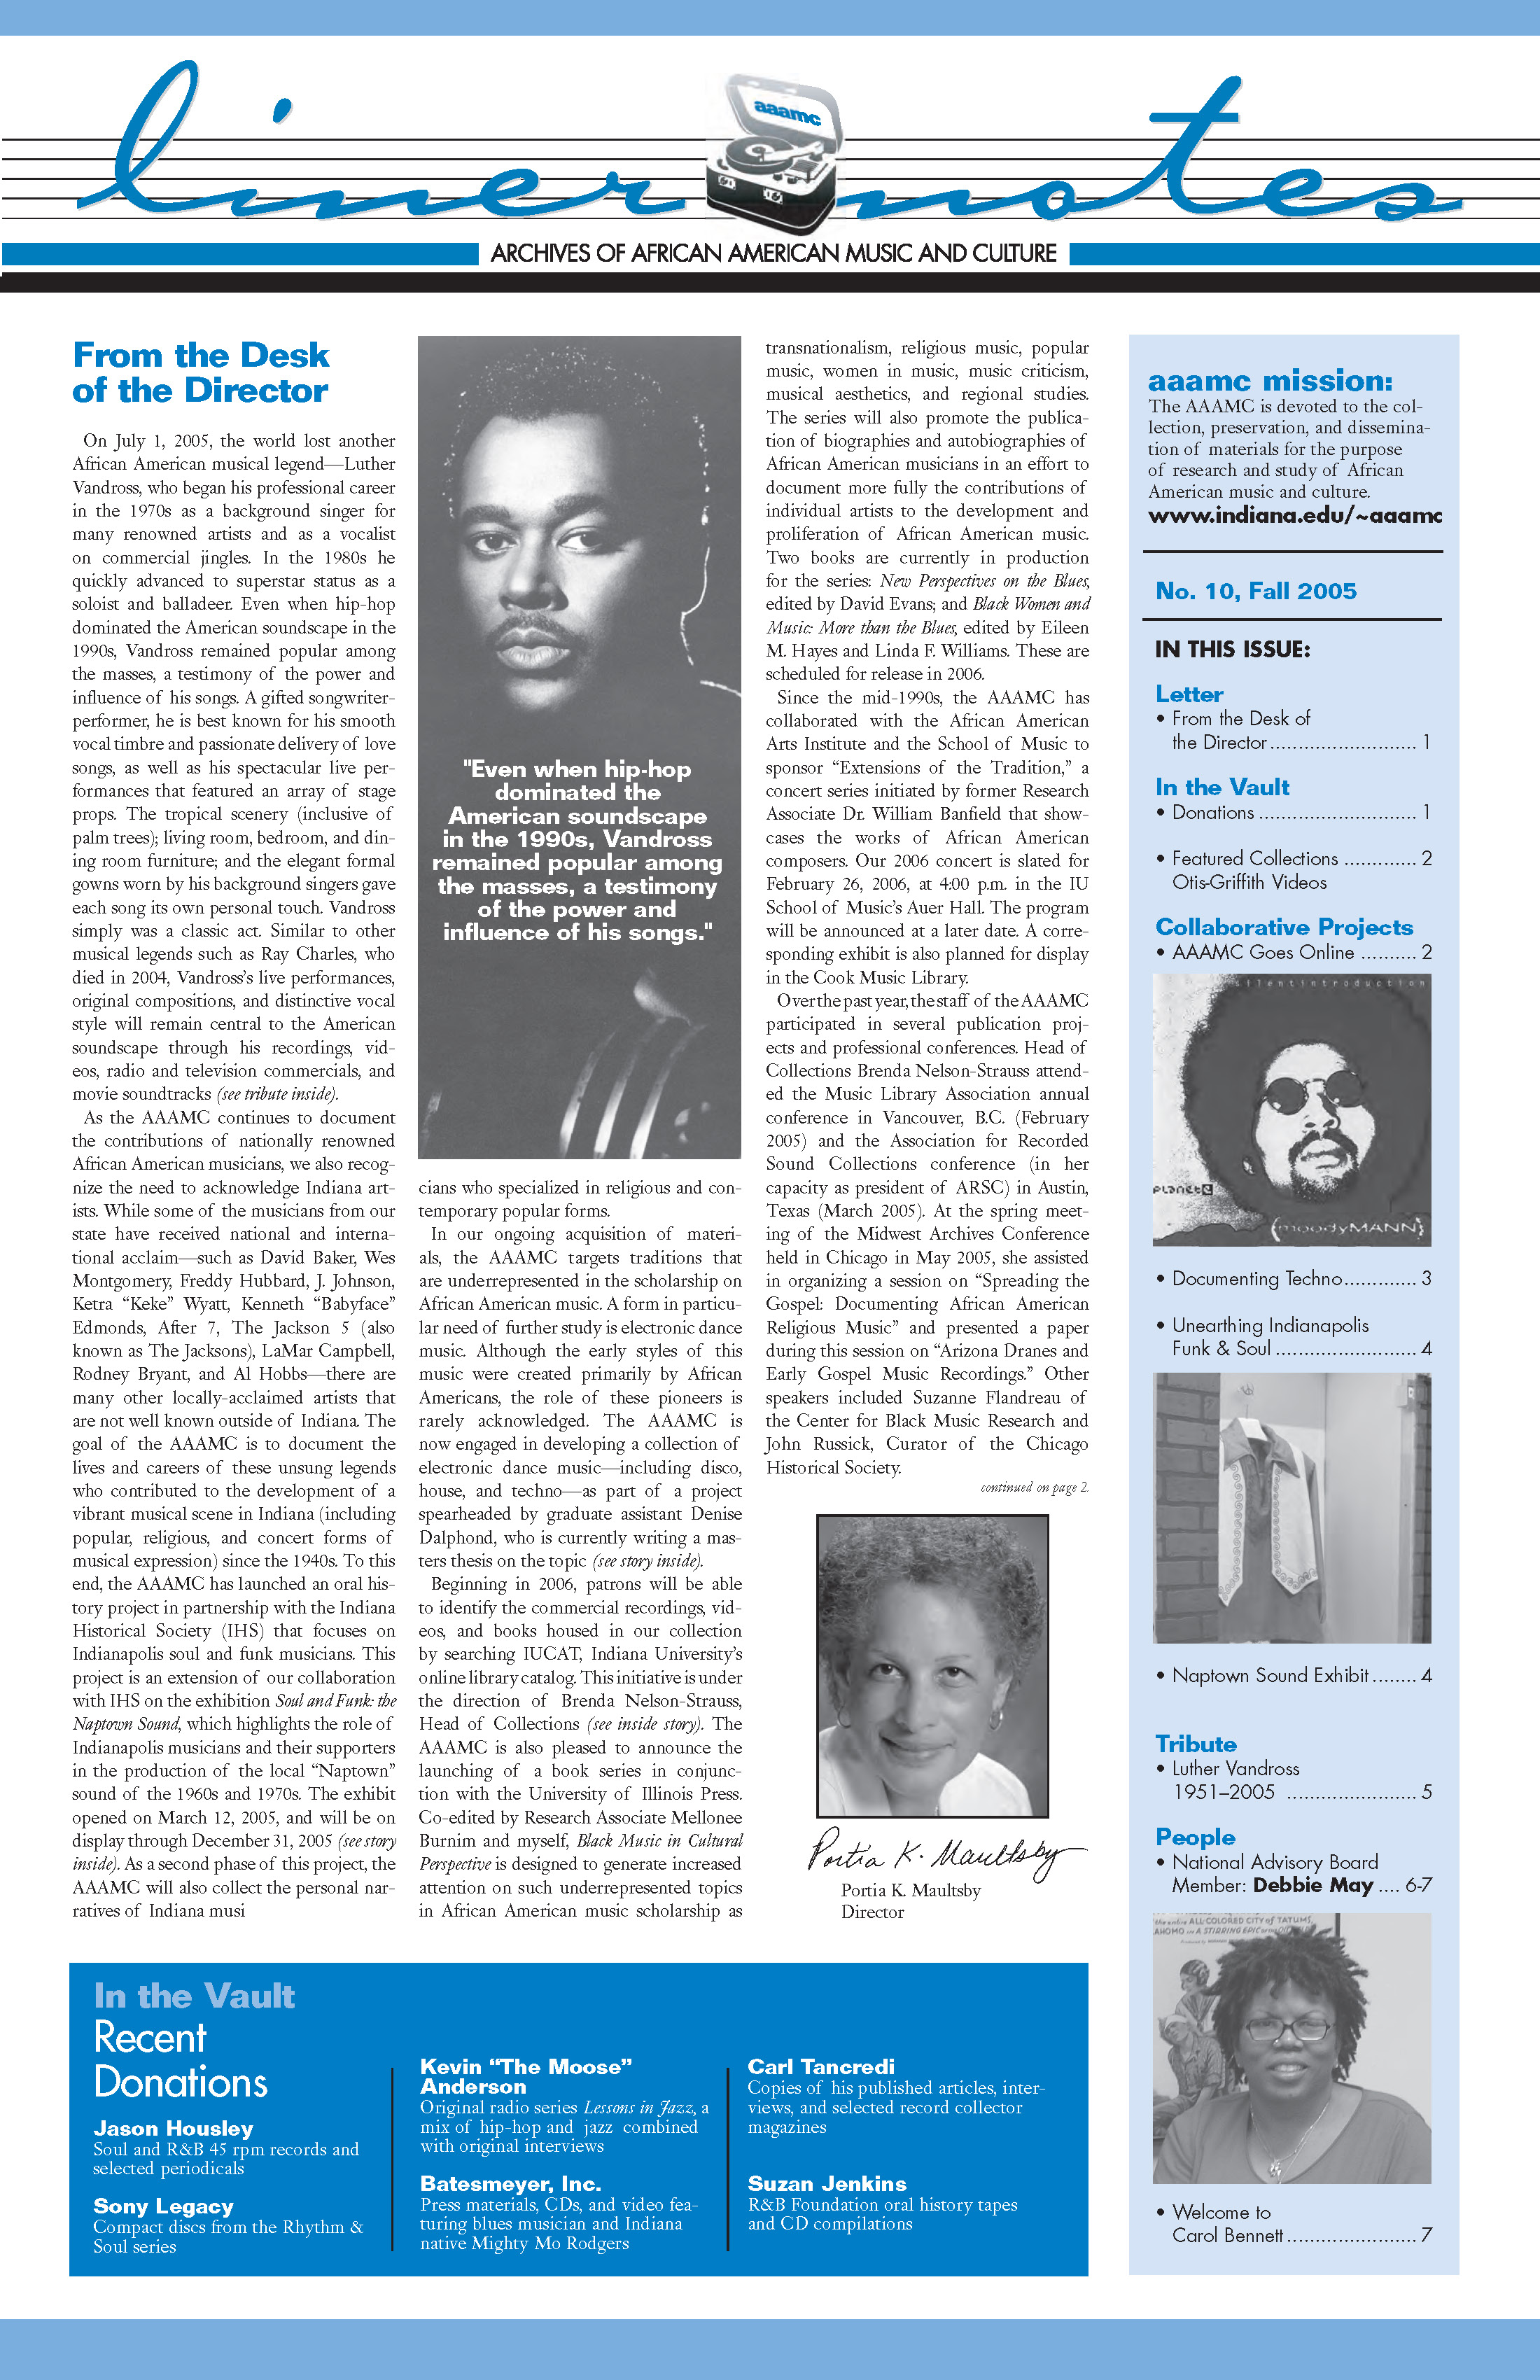 Liner Notes, no. 10 (Fall 2005) feature image